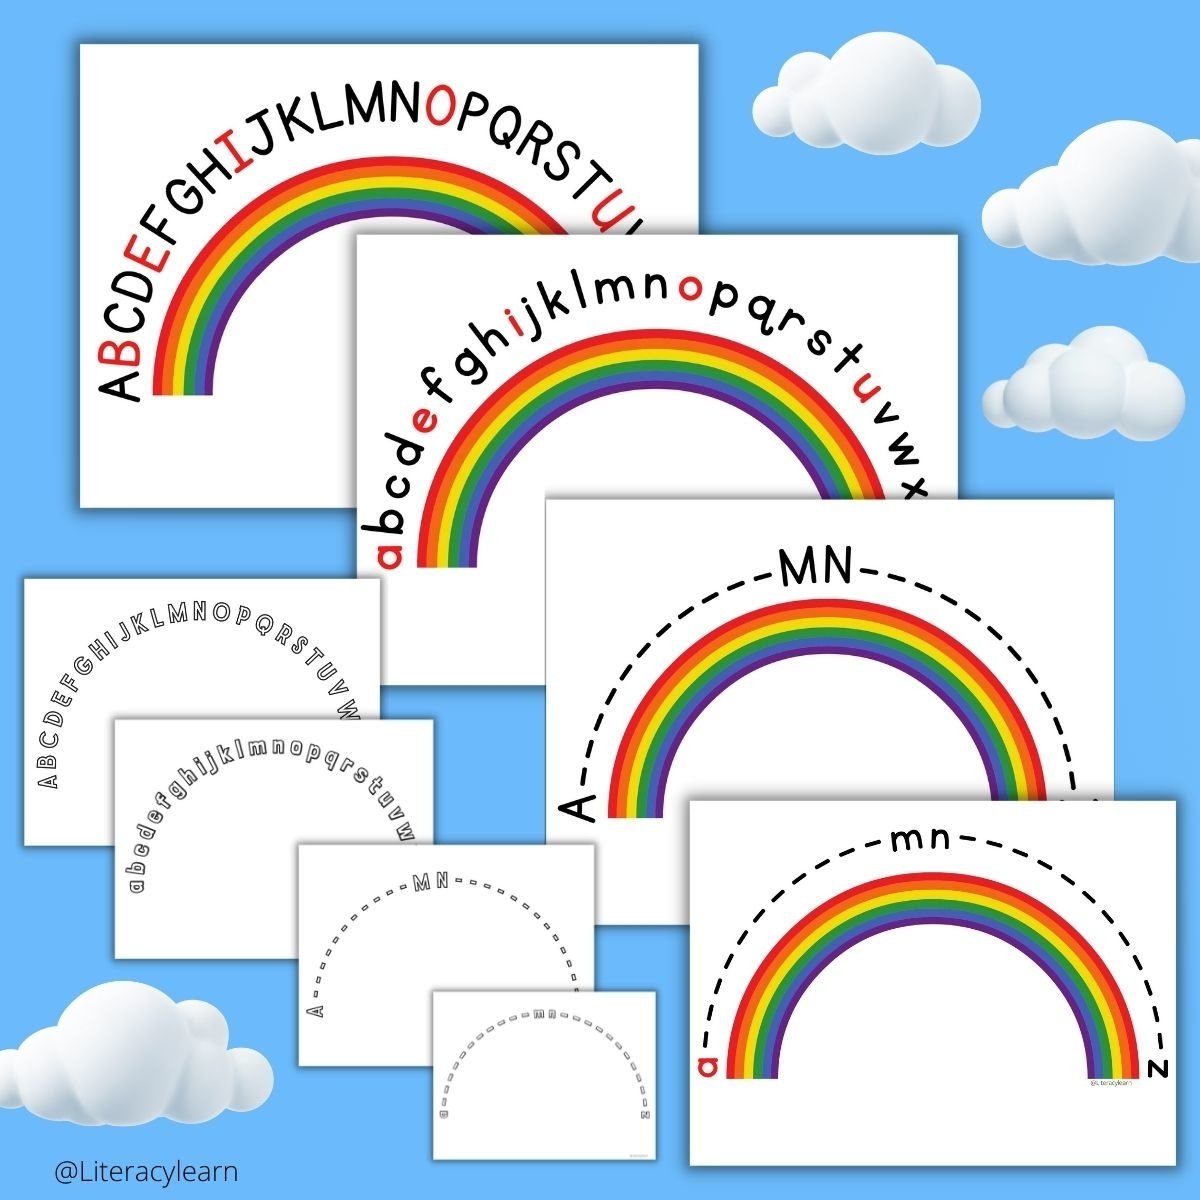 A blue sky with 8 versions of alphabet arcs and bright colored rainbows.